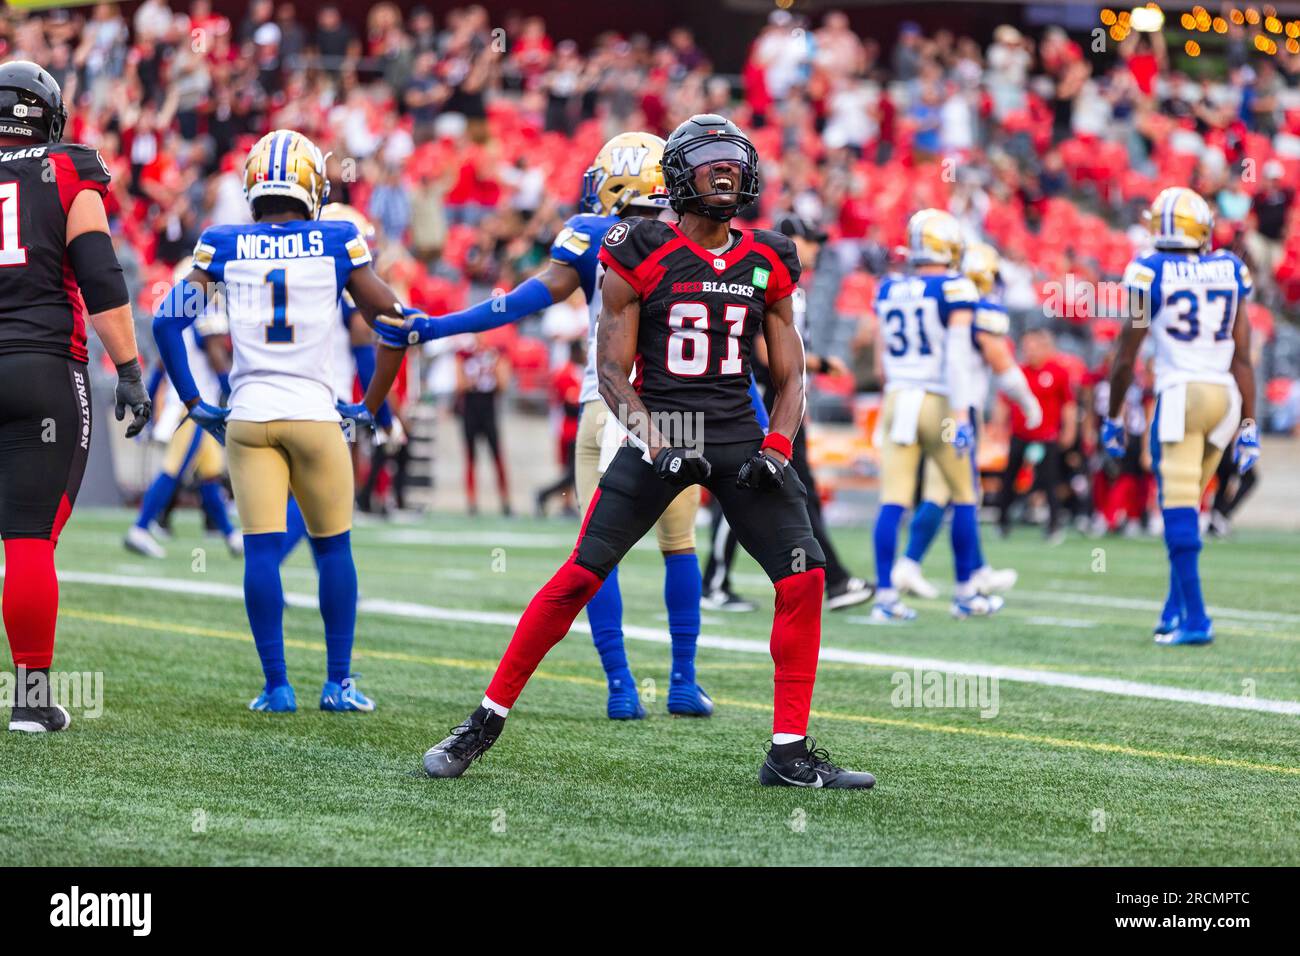 OTTAWA, ON - JULY 15: Ottawa Redblacks wide receiver Savon Scarver (81)  celebrates the two point conversion with teammates during Canadian Football  League action between the Winnipeg Blue Bombers and Ottawa Redblacks